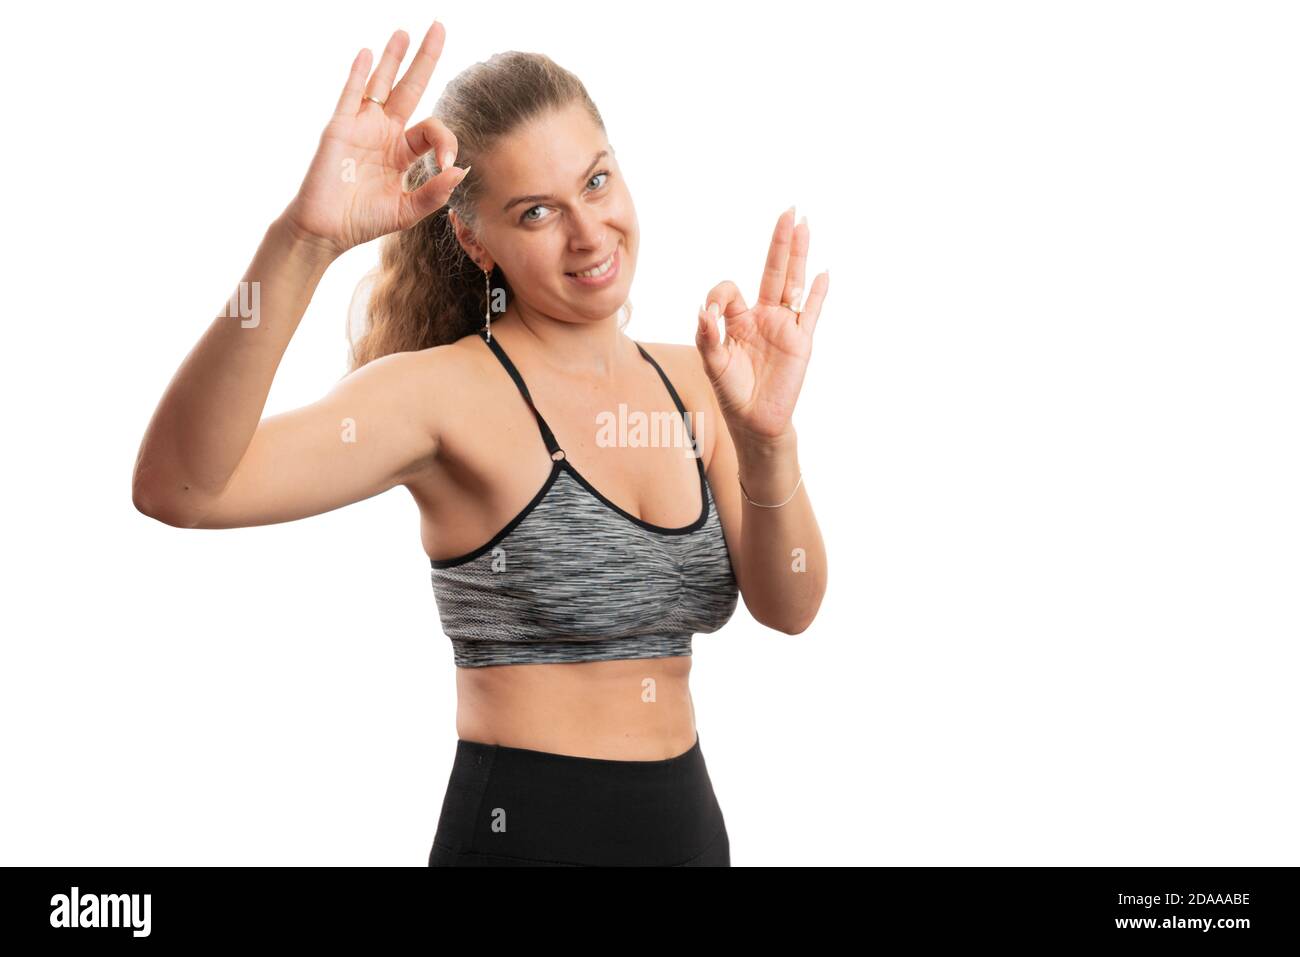 Smiling female model showing double okay gesture using fingers in sports attire with blank copyspace for advertising isolated on white background Stock Photo